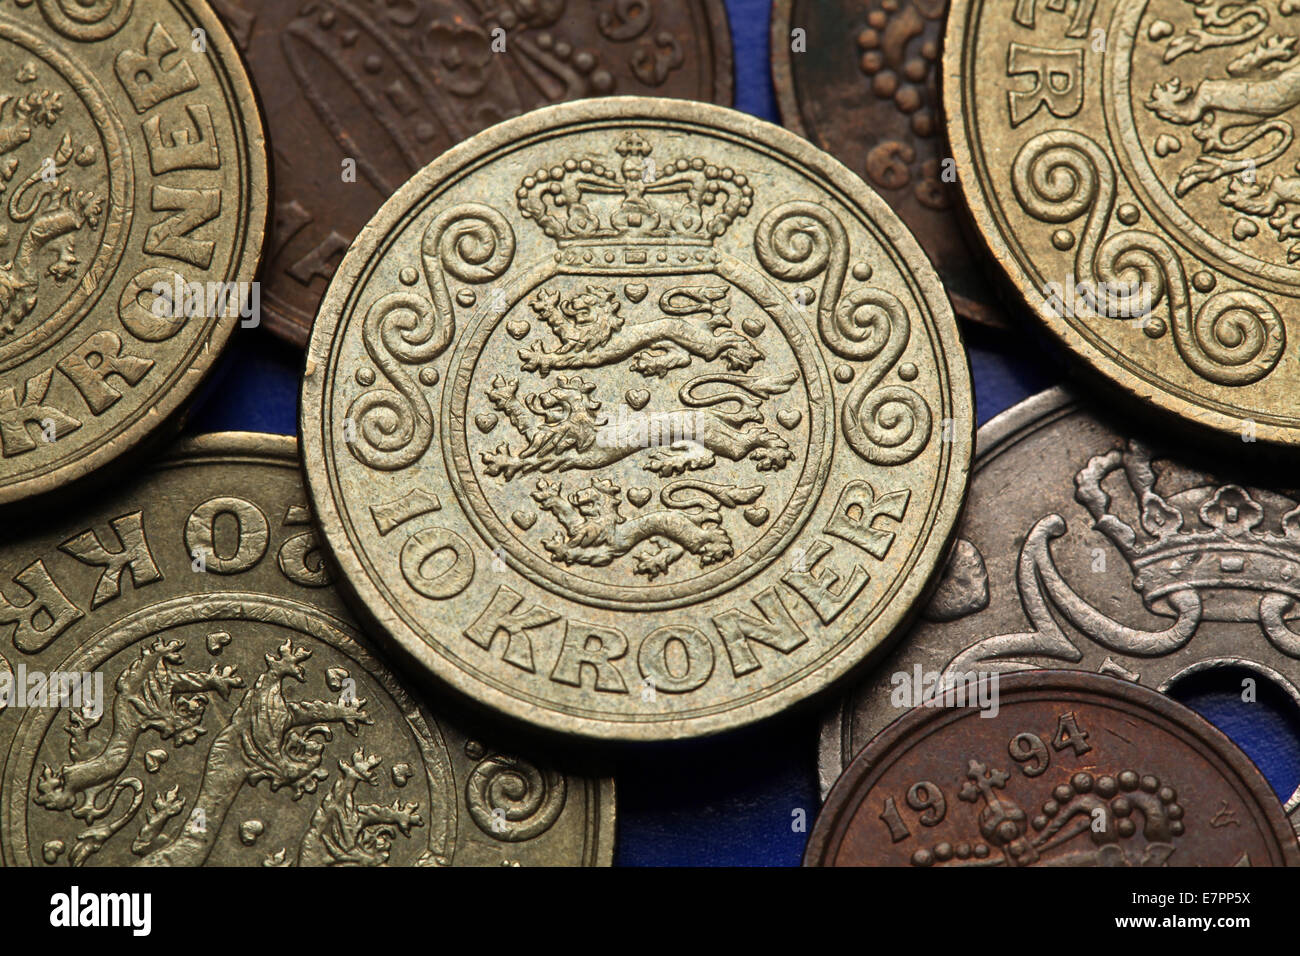 Coins of Denmark. Danish national coat of arms depicted in Danish krone coins. Stock Photo